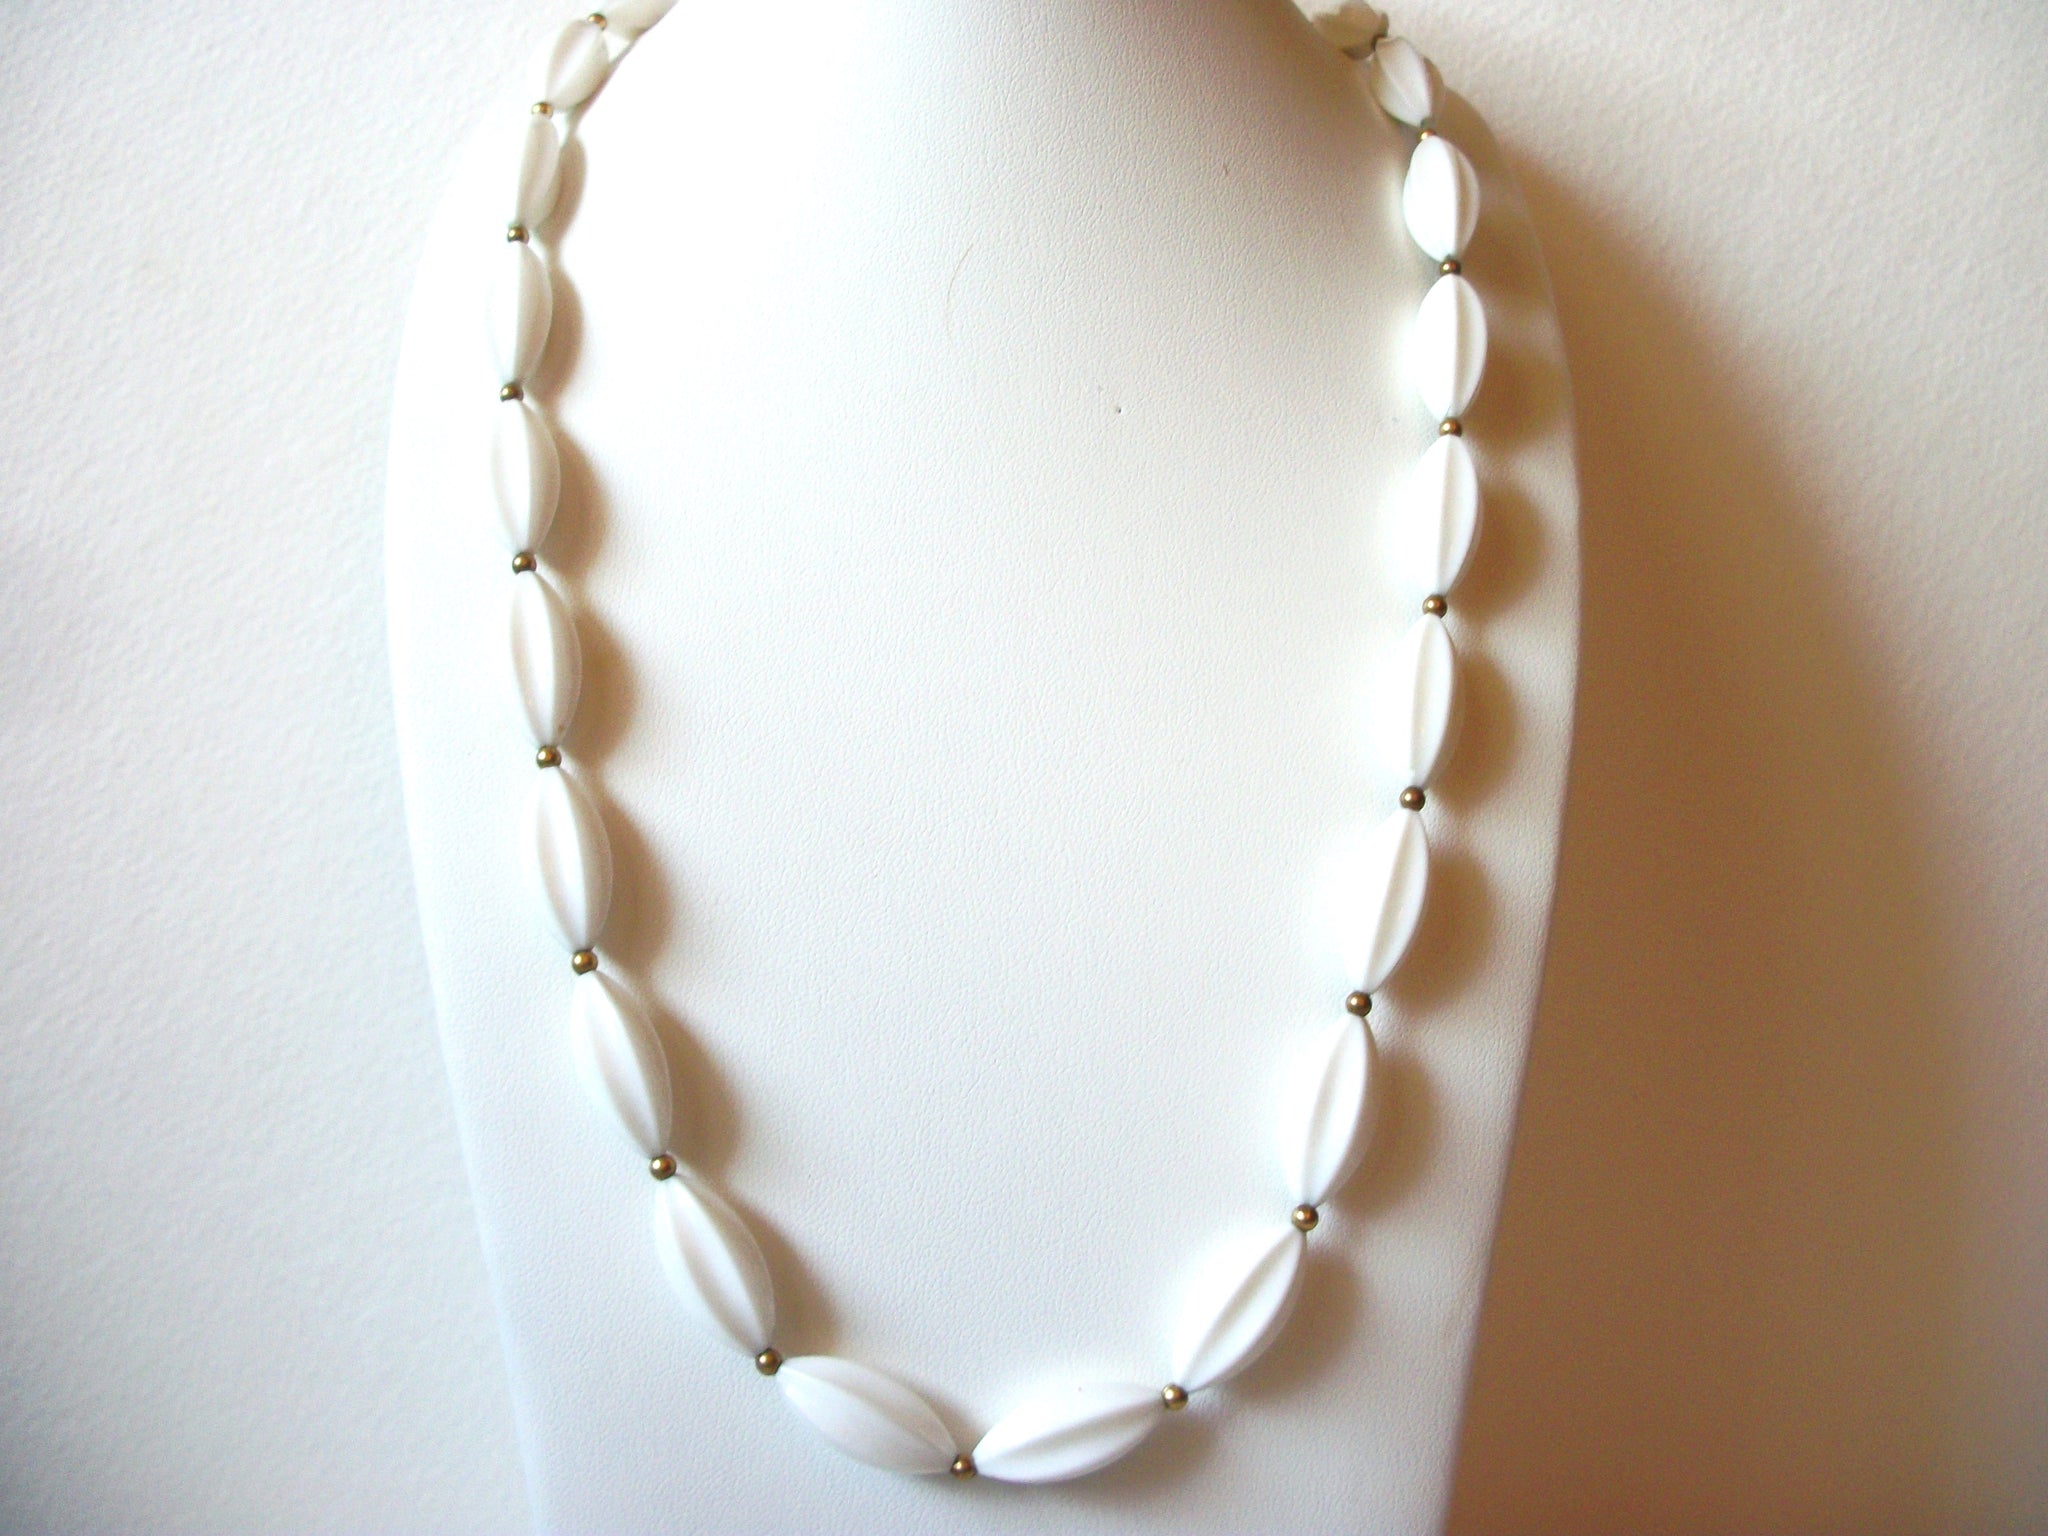 Vintage White Watermelon Beads Necklace 61920